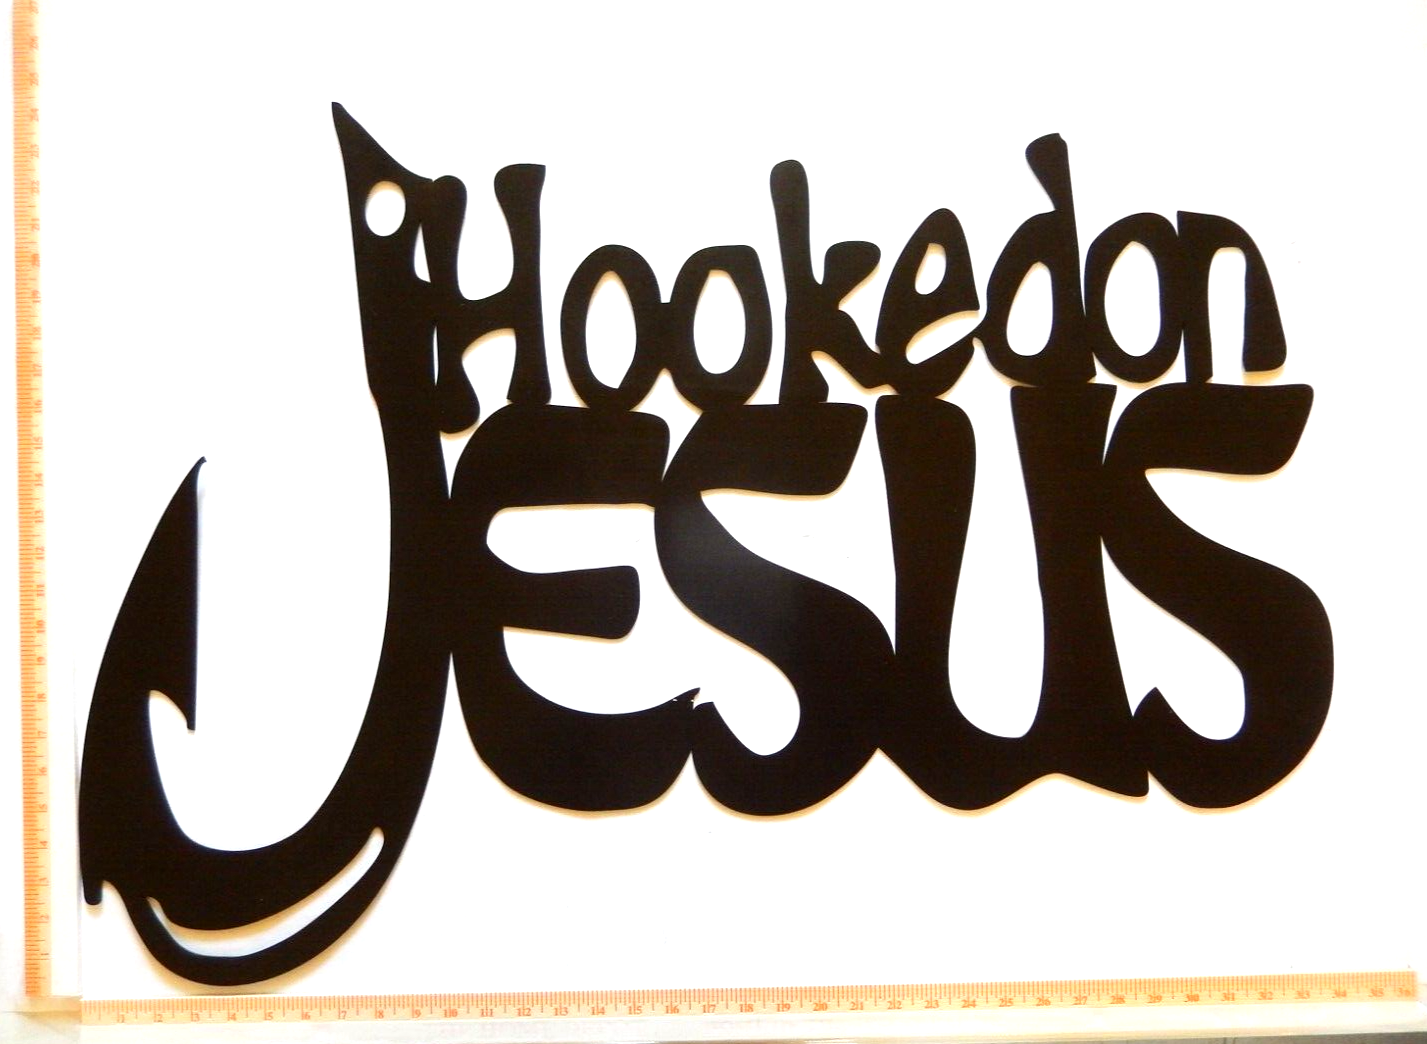 ~NEW~ EXTRA LARGE 14ga. - "HOOKED ON JESUS"   Wall Metal Sign - 34" x 24"